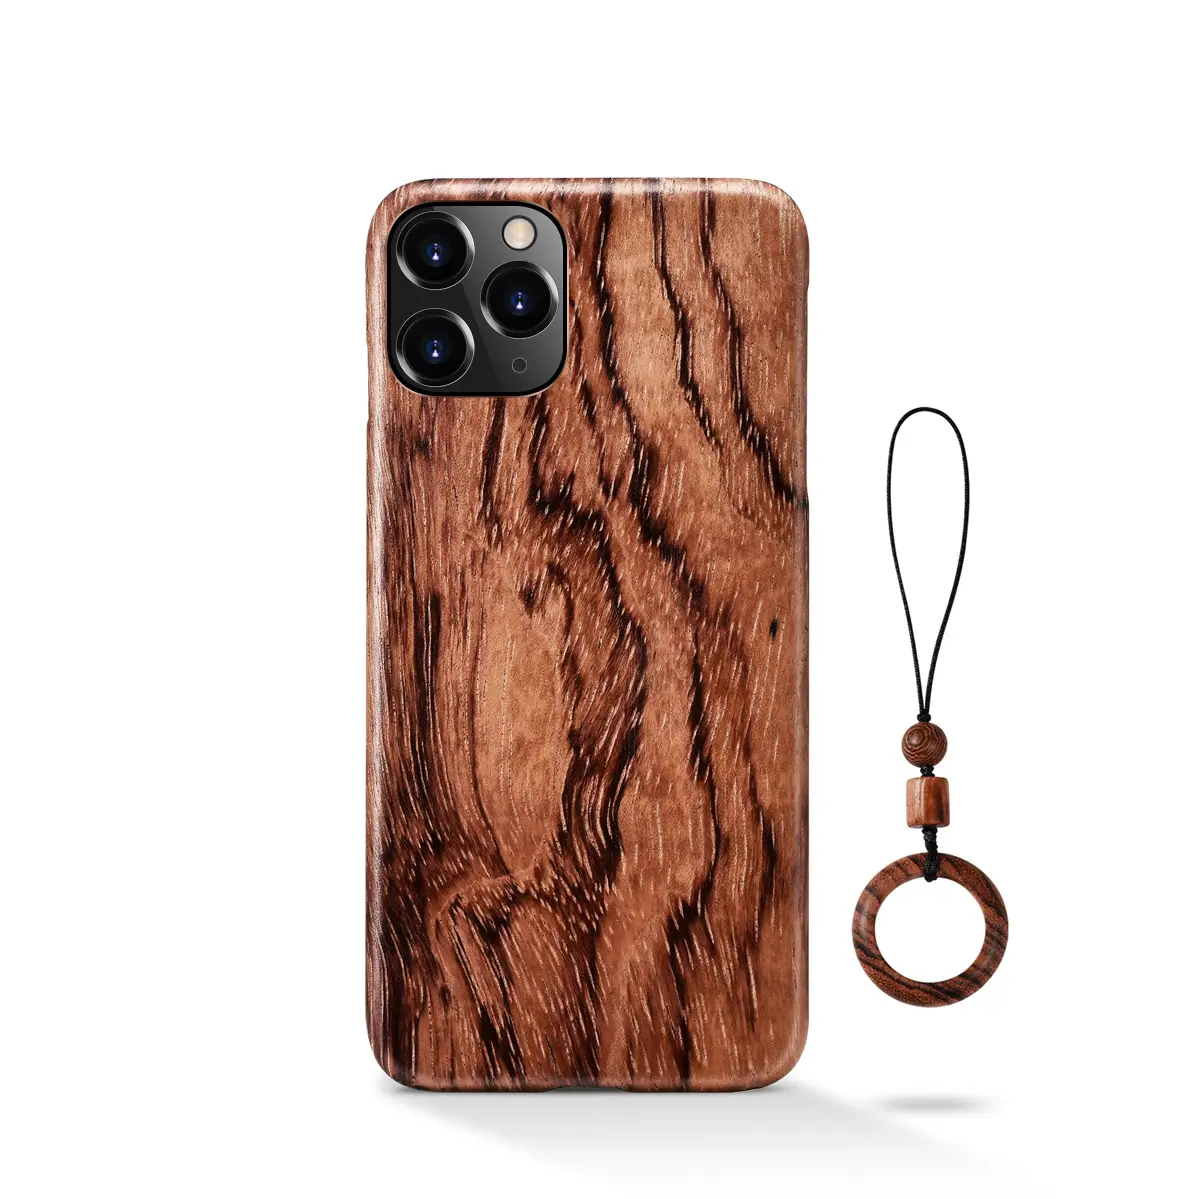 Best Selling Items 13 Pro Designers Cases Accessories Natural wind wooden phone case for Iphone 13